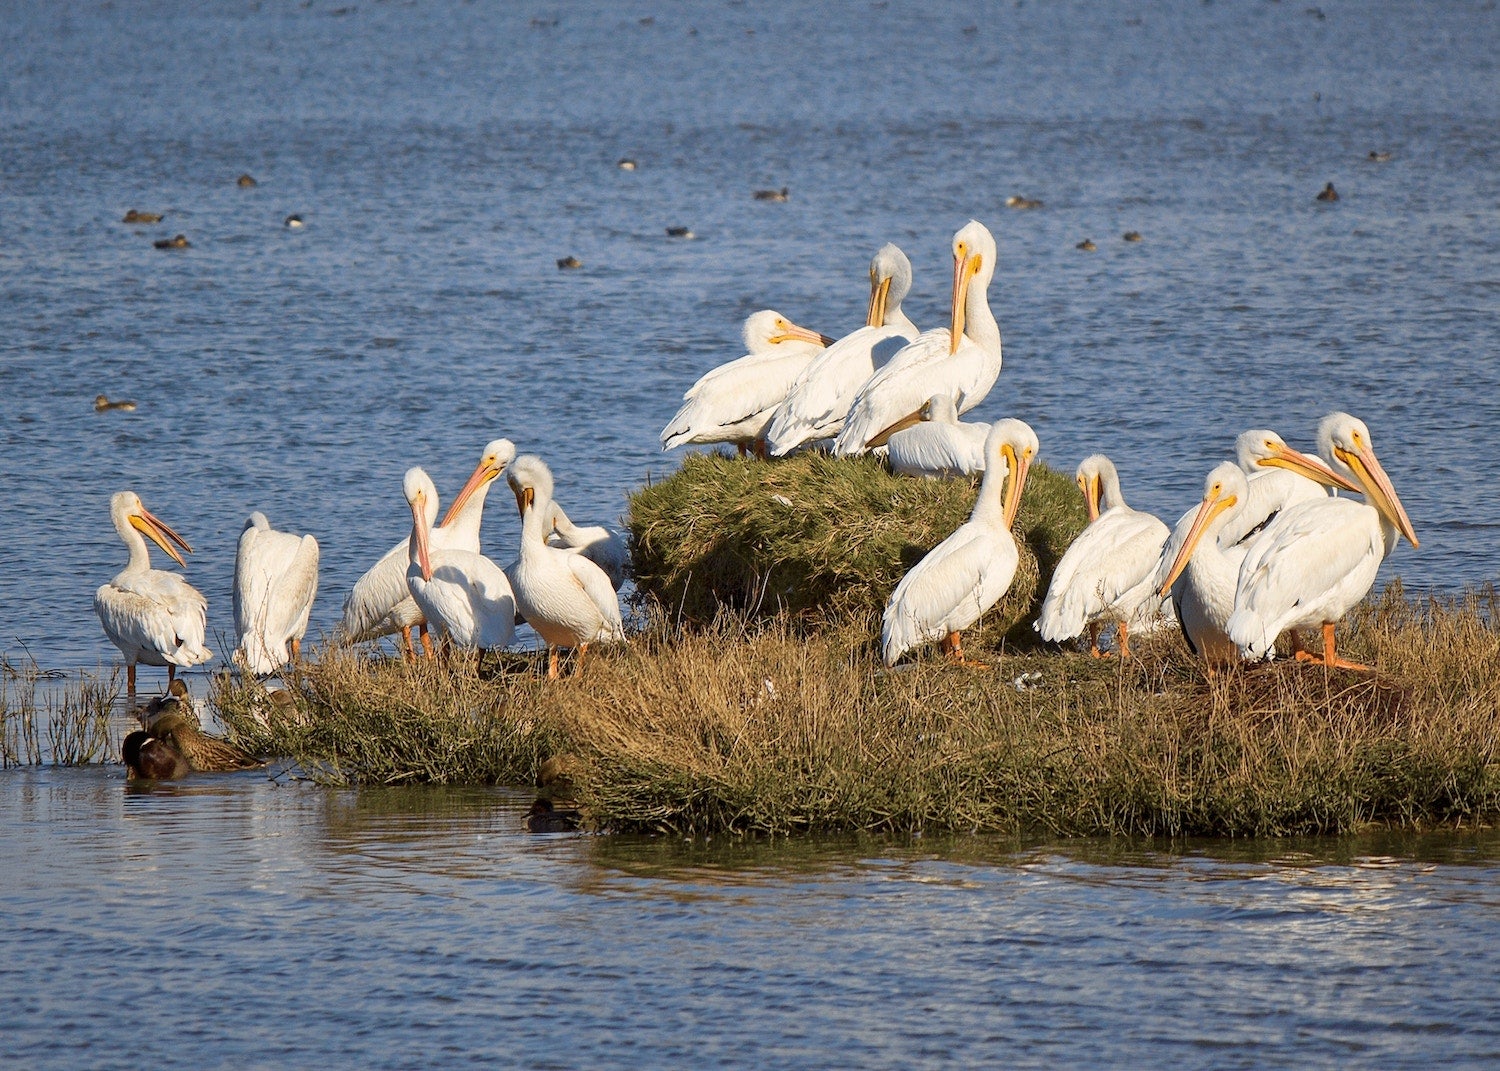 spot pelicans in groups on a small island when you go birding